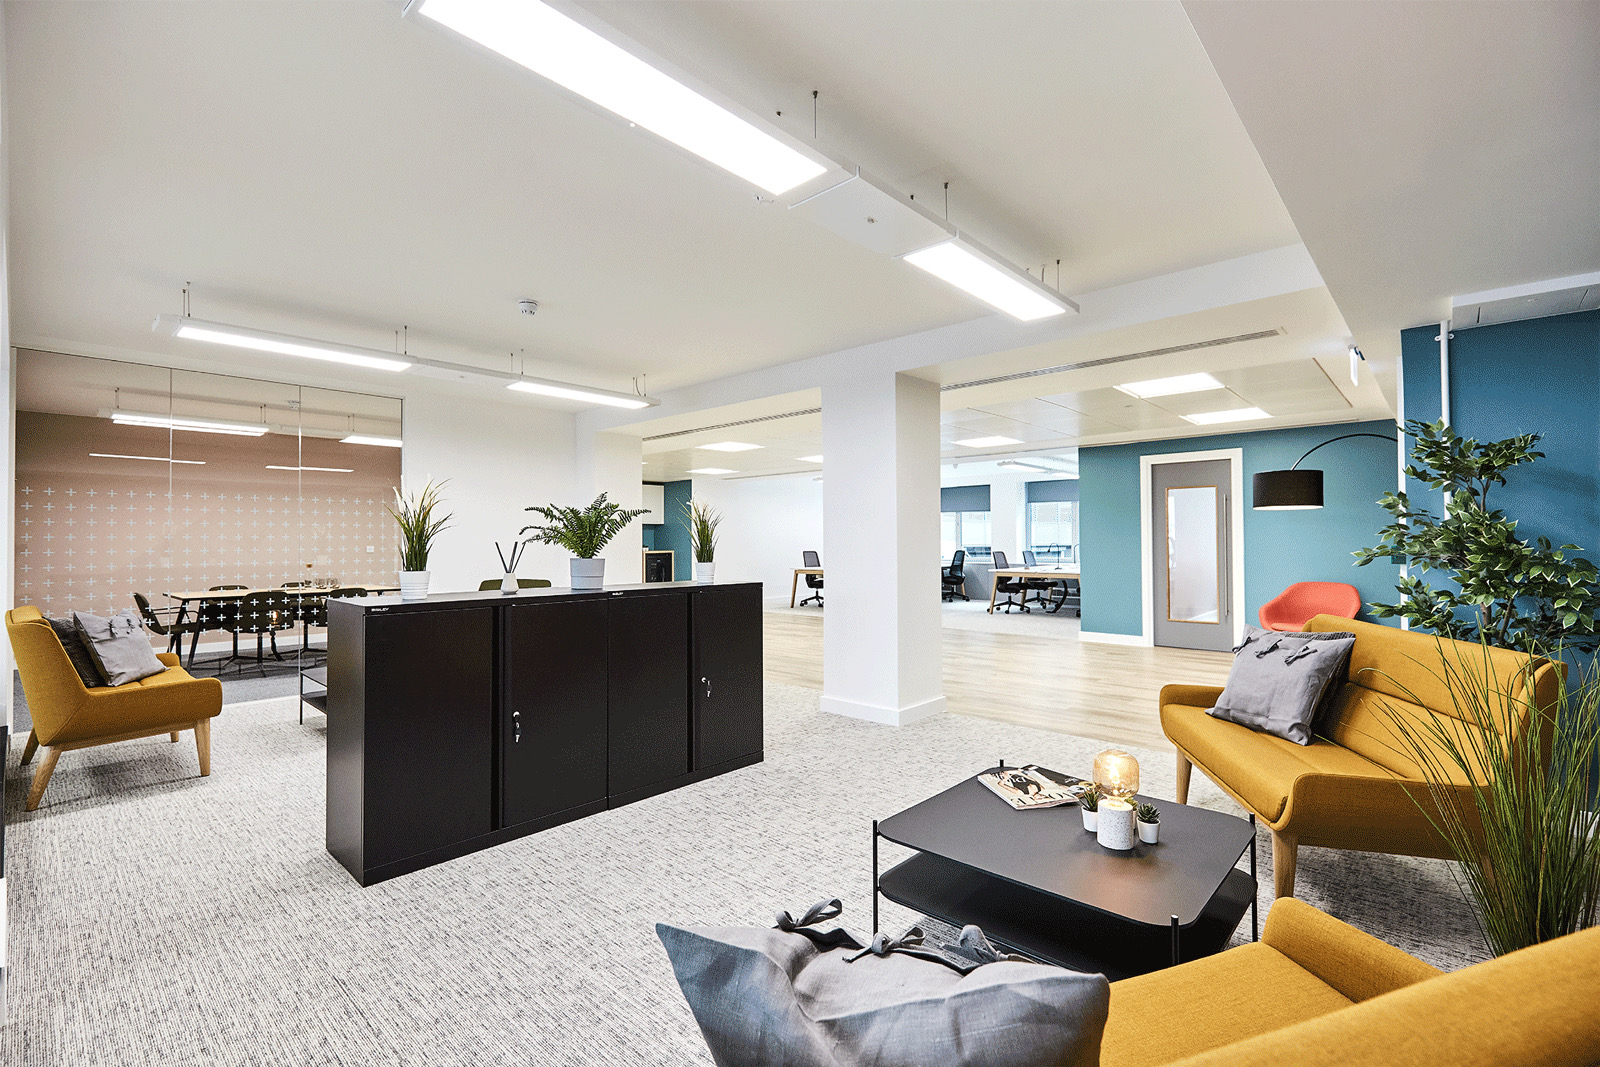 A Look Inside Global Investment Firm’s New London Office